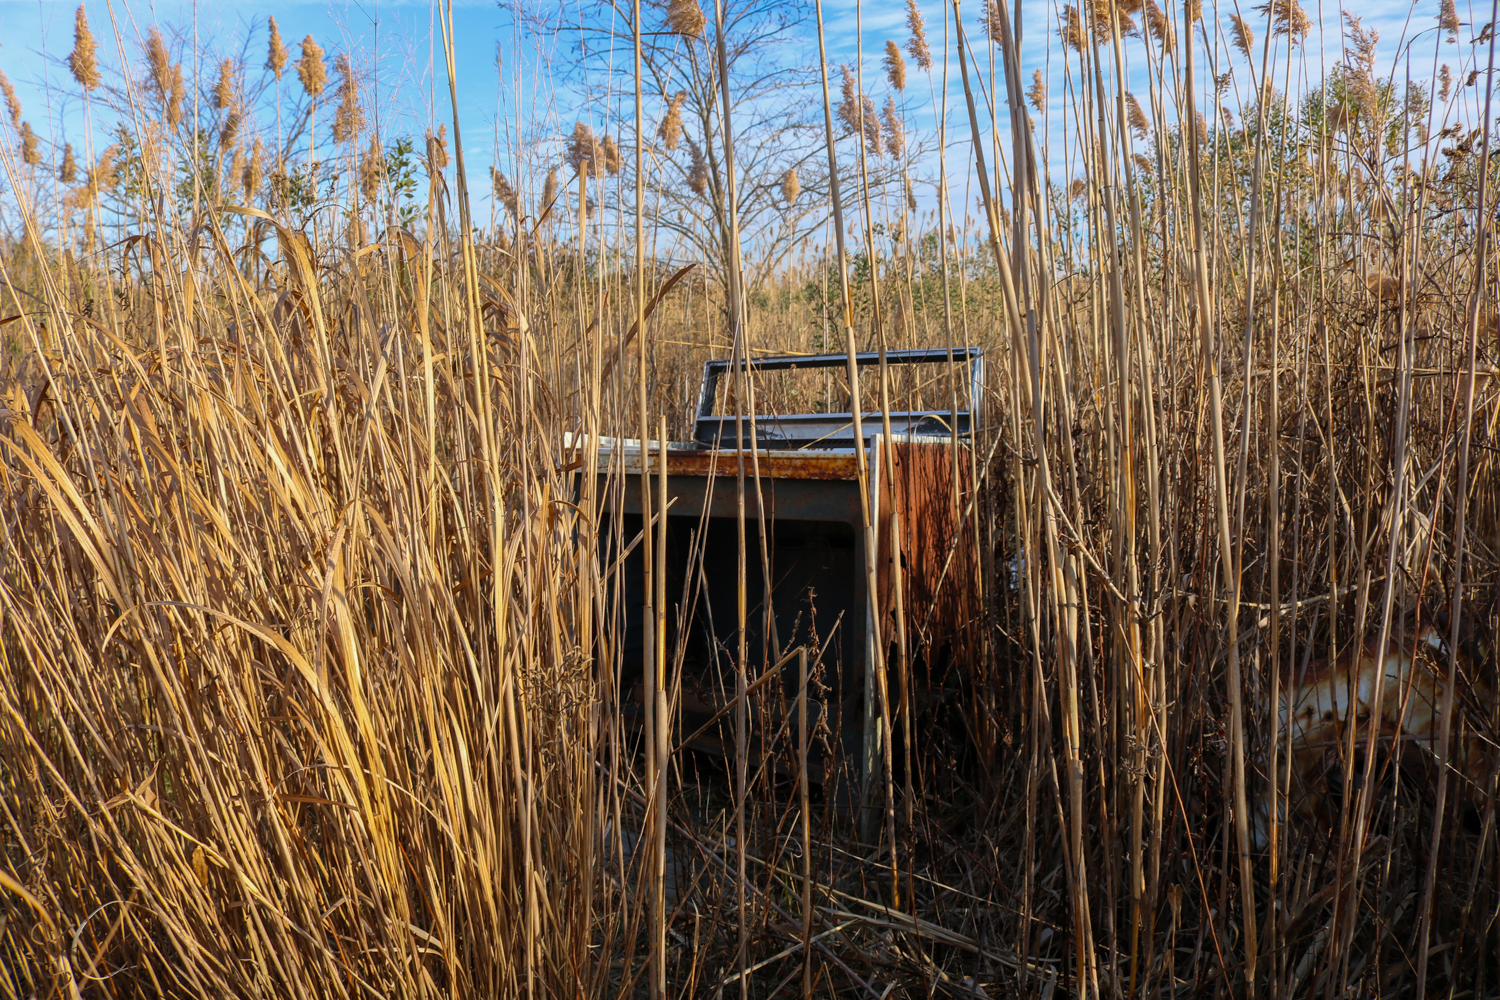 An abandoned appliance--a washing machine, dishwasher or a stove, most likely--sits in the middle of overgrown phragmite. 